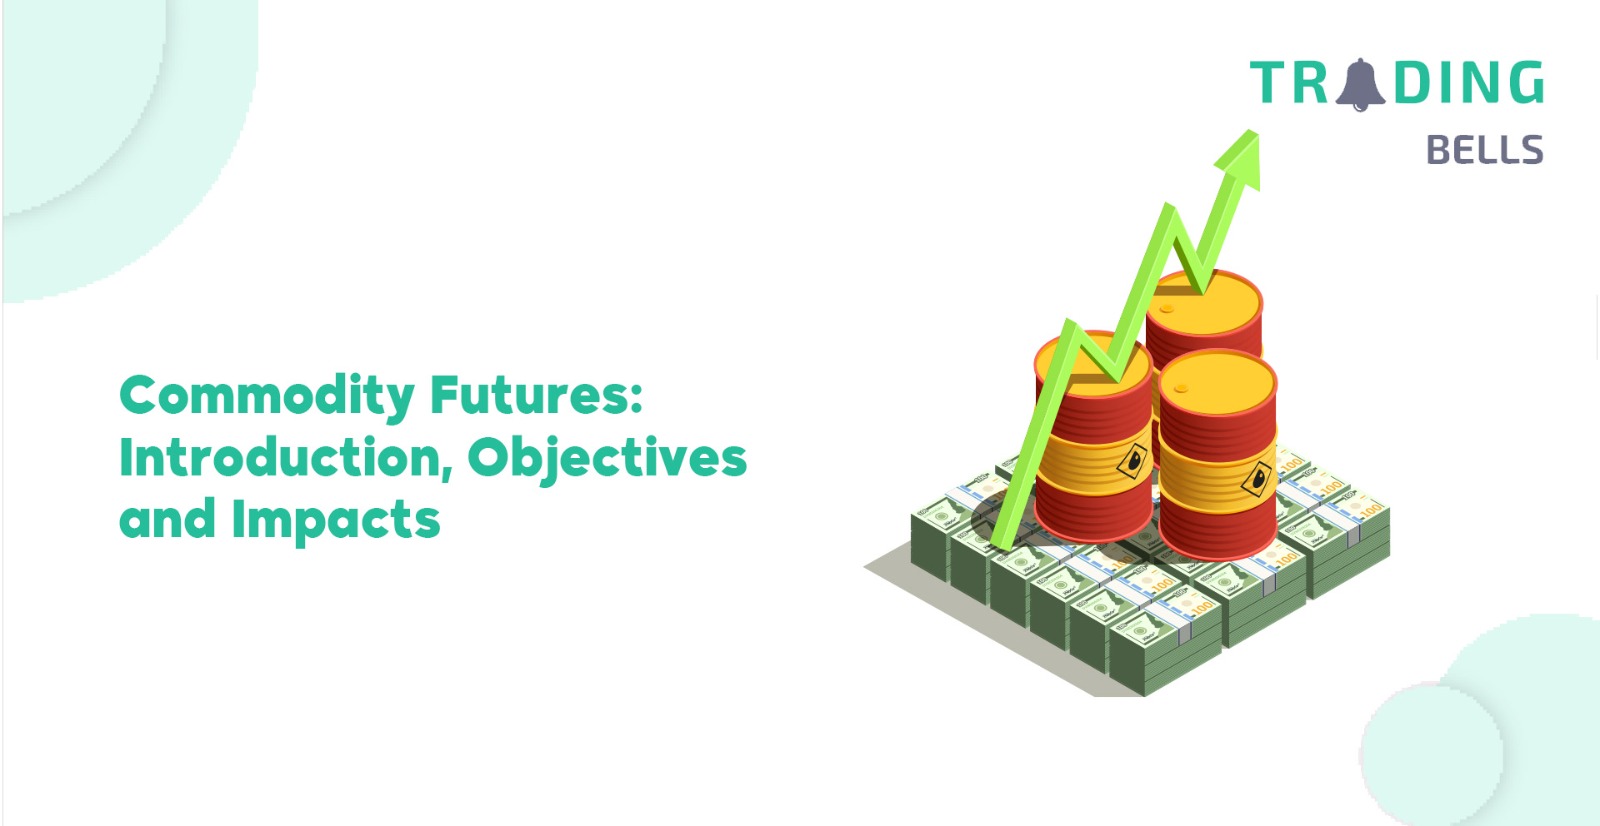 Commodity Futures: Introduction, Objectives and Impacts